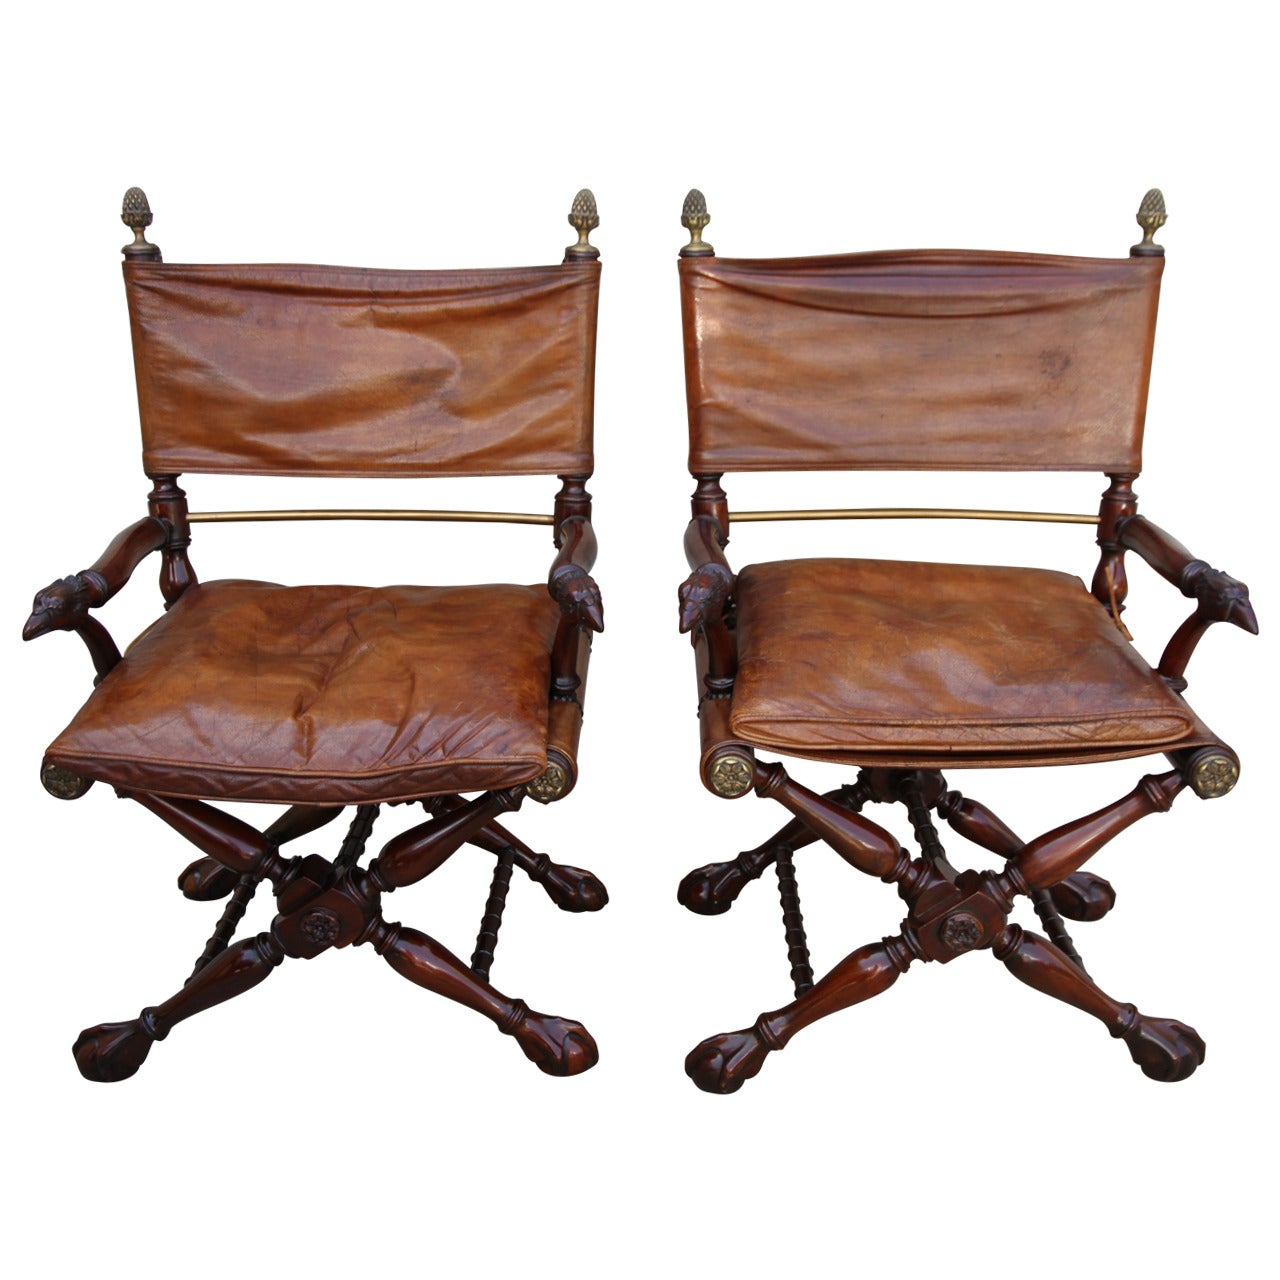 Pair of American Campaign Style Armchairs